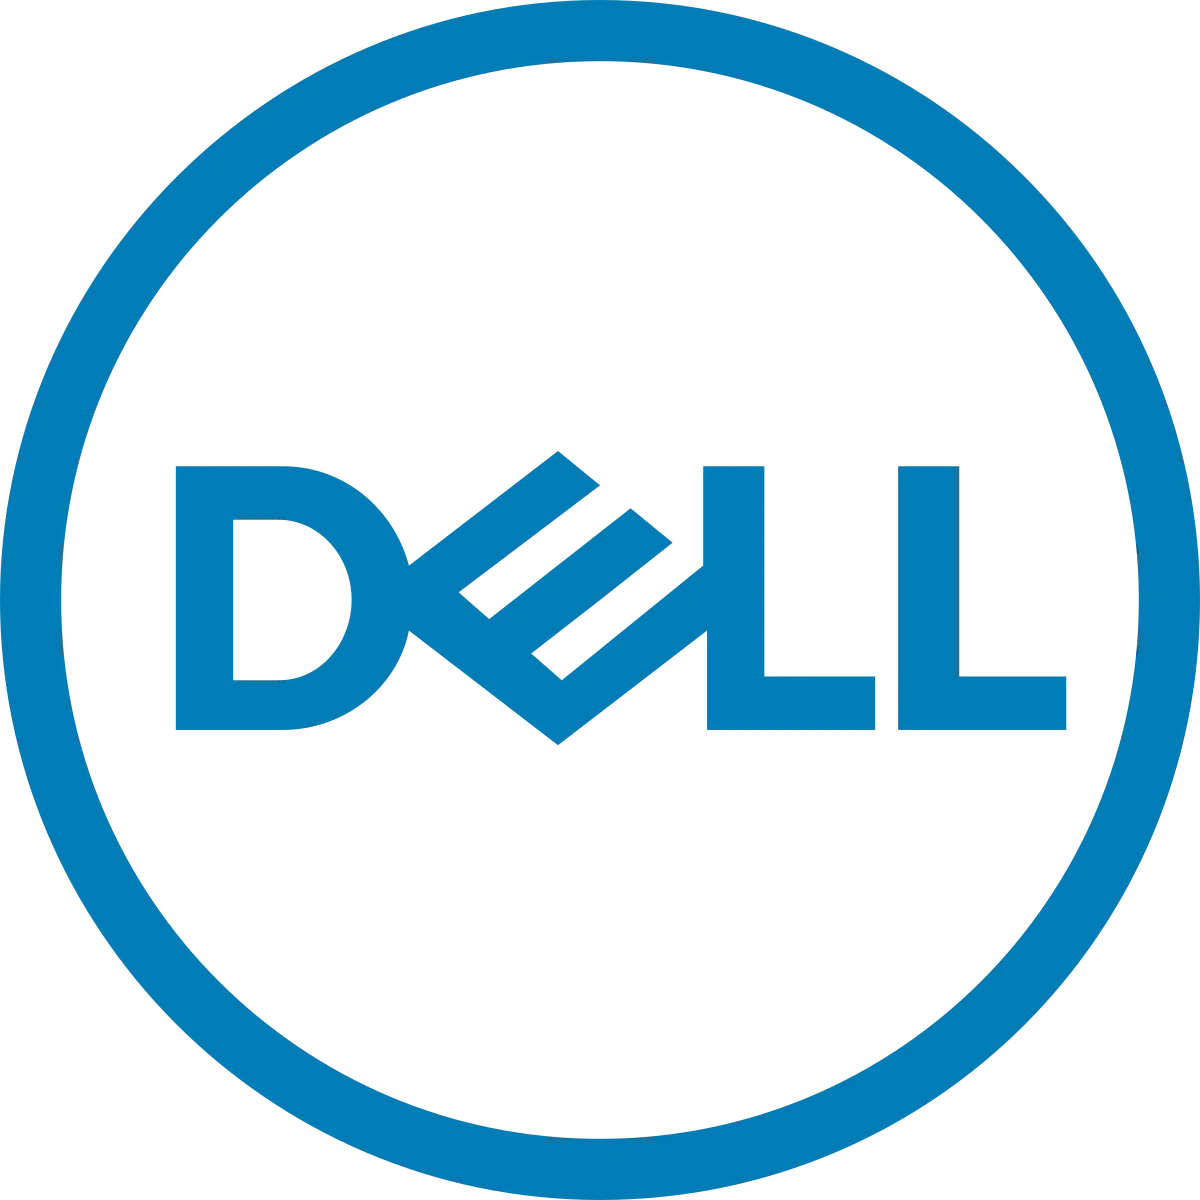 Dell XPS 13 (2021)